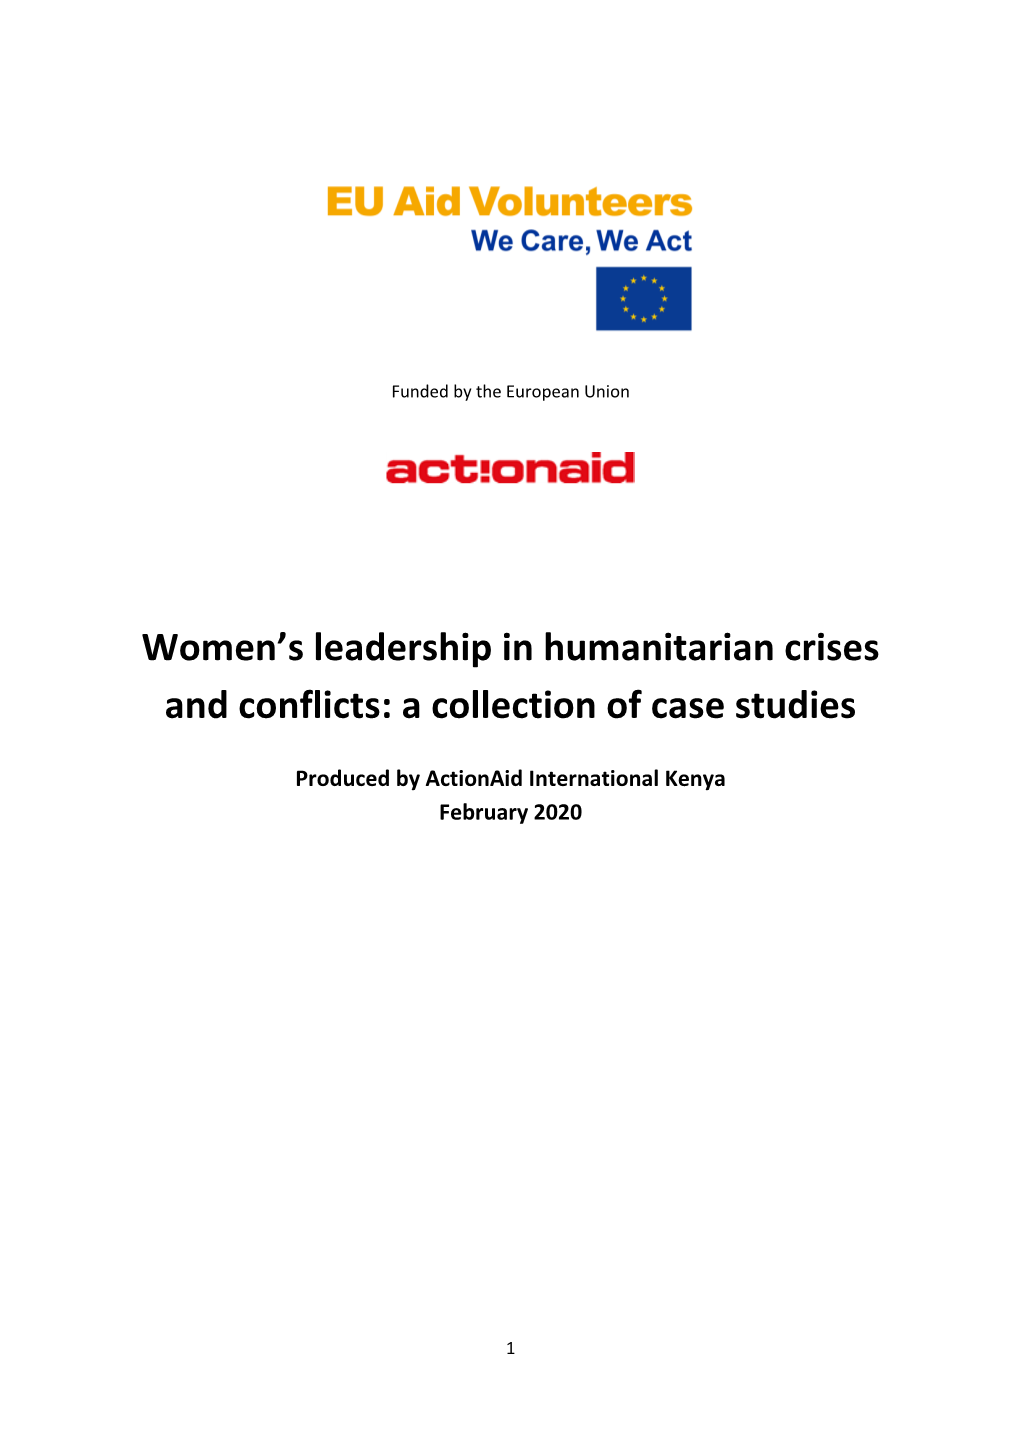 Women's Leadership in Humanitarian Crises and Conflicts: a Collection Of